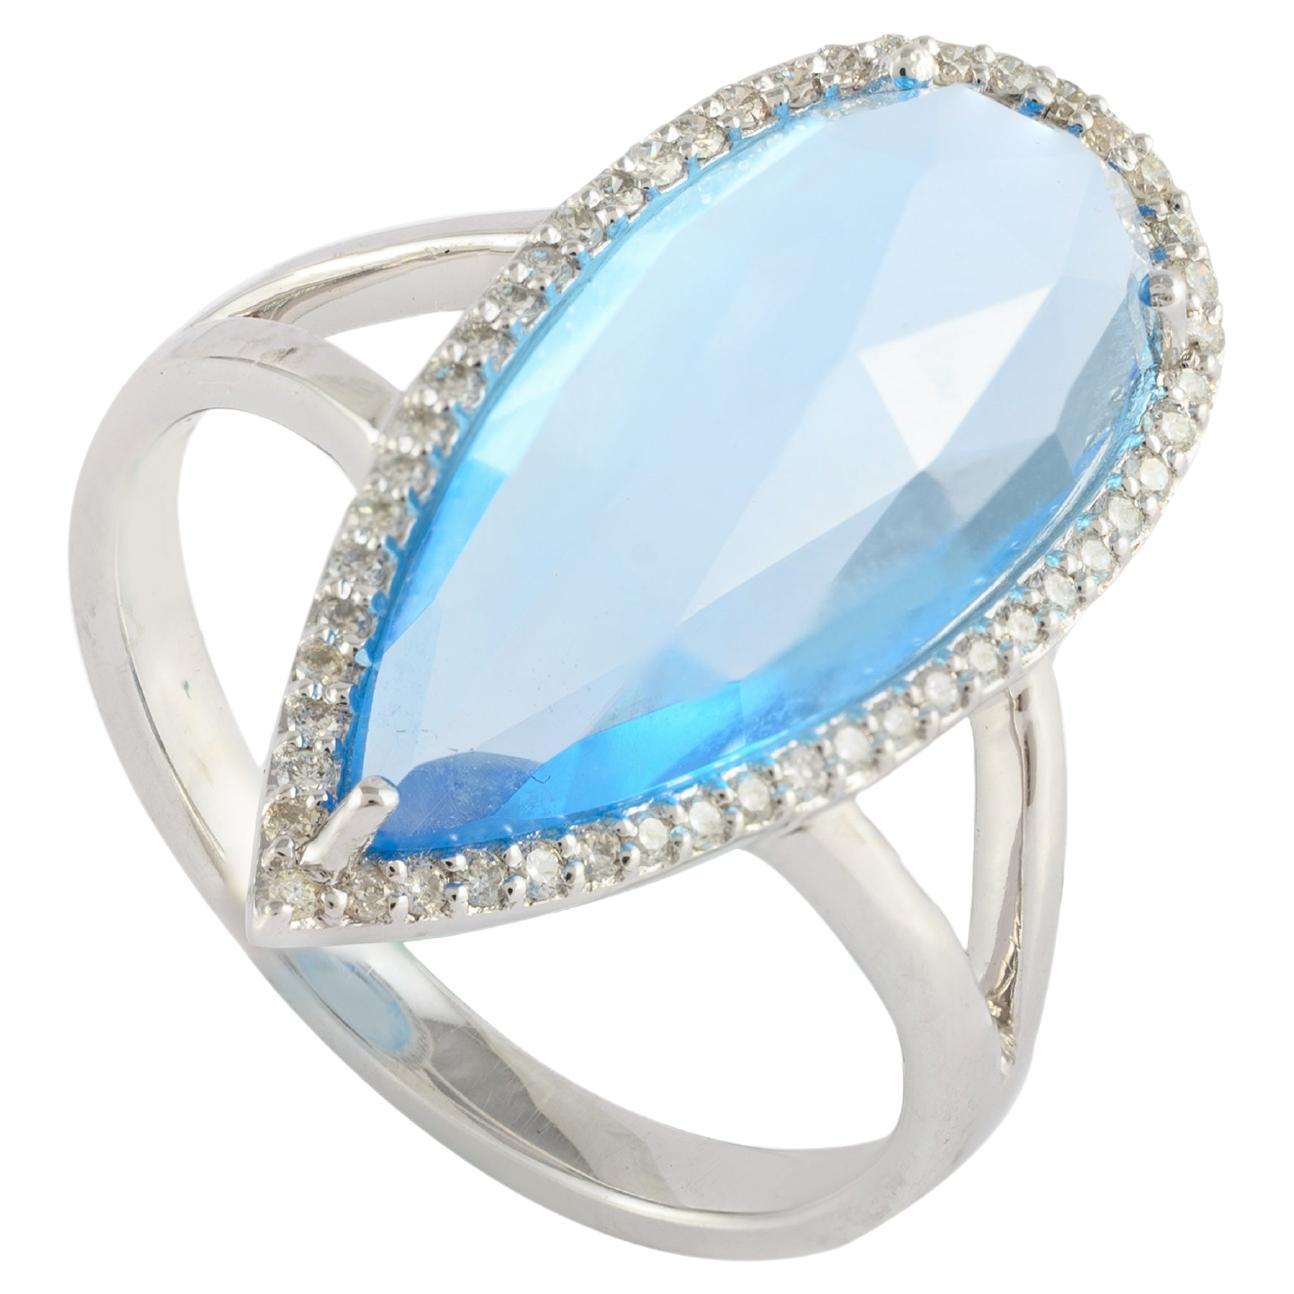 Glitzy 6.82 Carat Pear Blue Topaz Diamond Cocktail Ring in 14k Solid White Gold